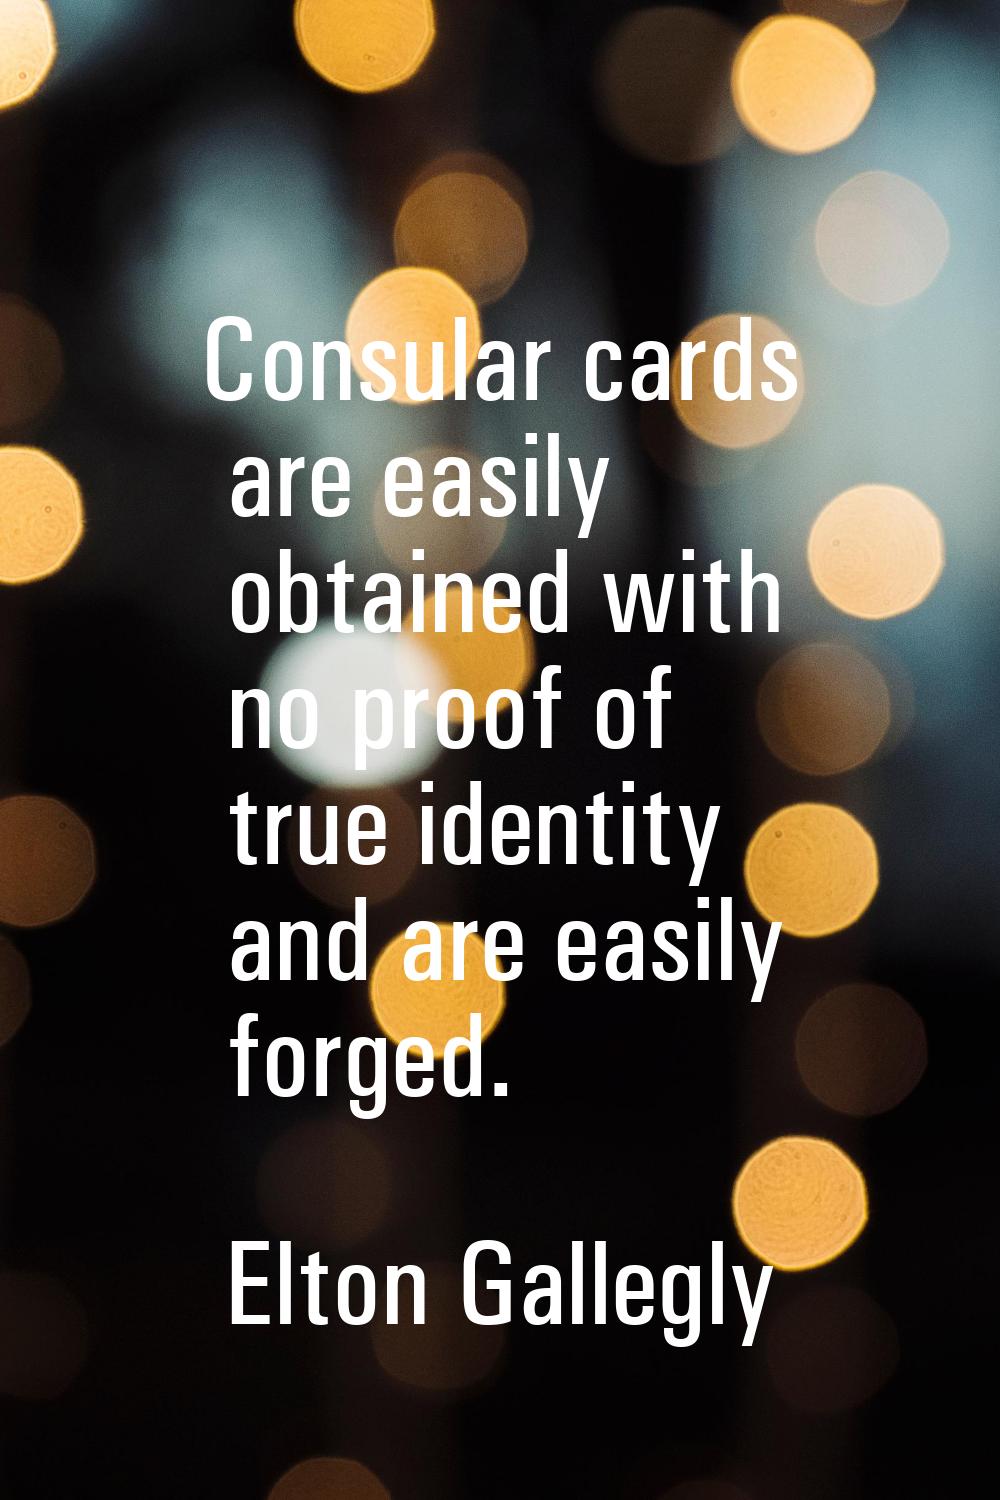 Consular cards are easily obtained with no proof of true identity and are easily forged.